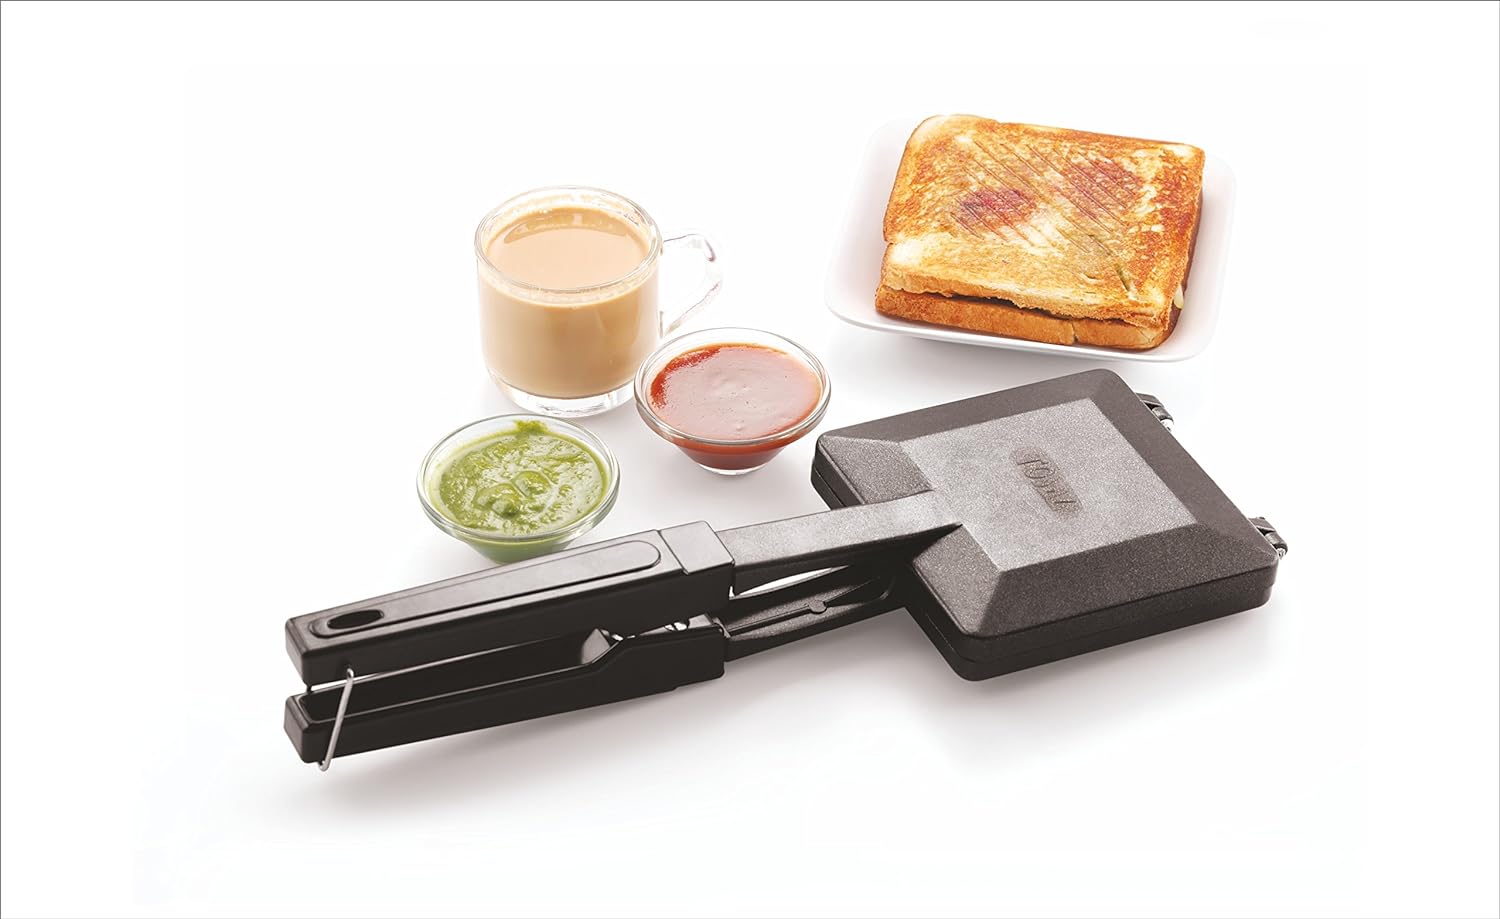 Tosaa Tstsolo Solo Regular Gas Sandwich Toaster (Black),Standard,2.2x13.5x5.3 In,Pack of 1